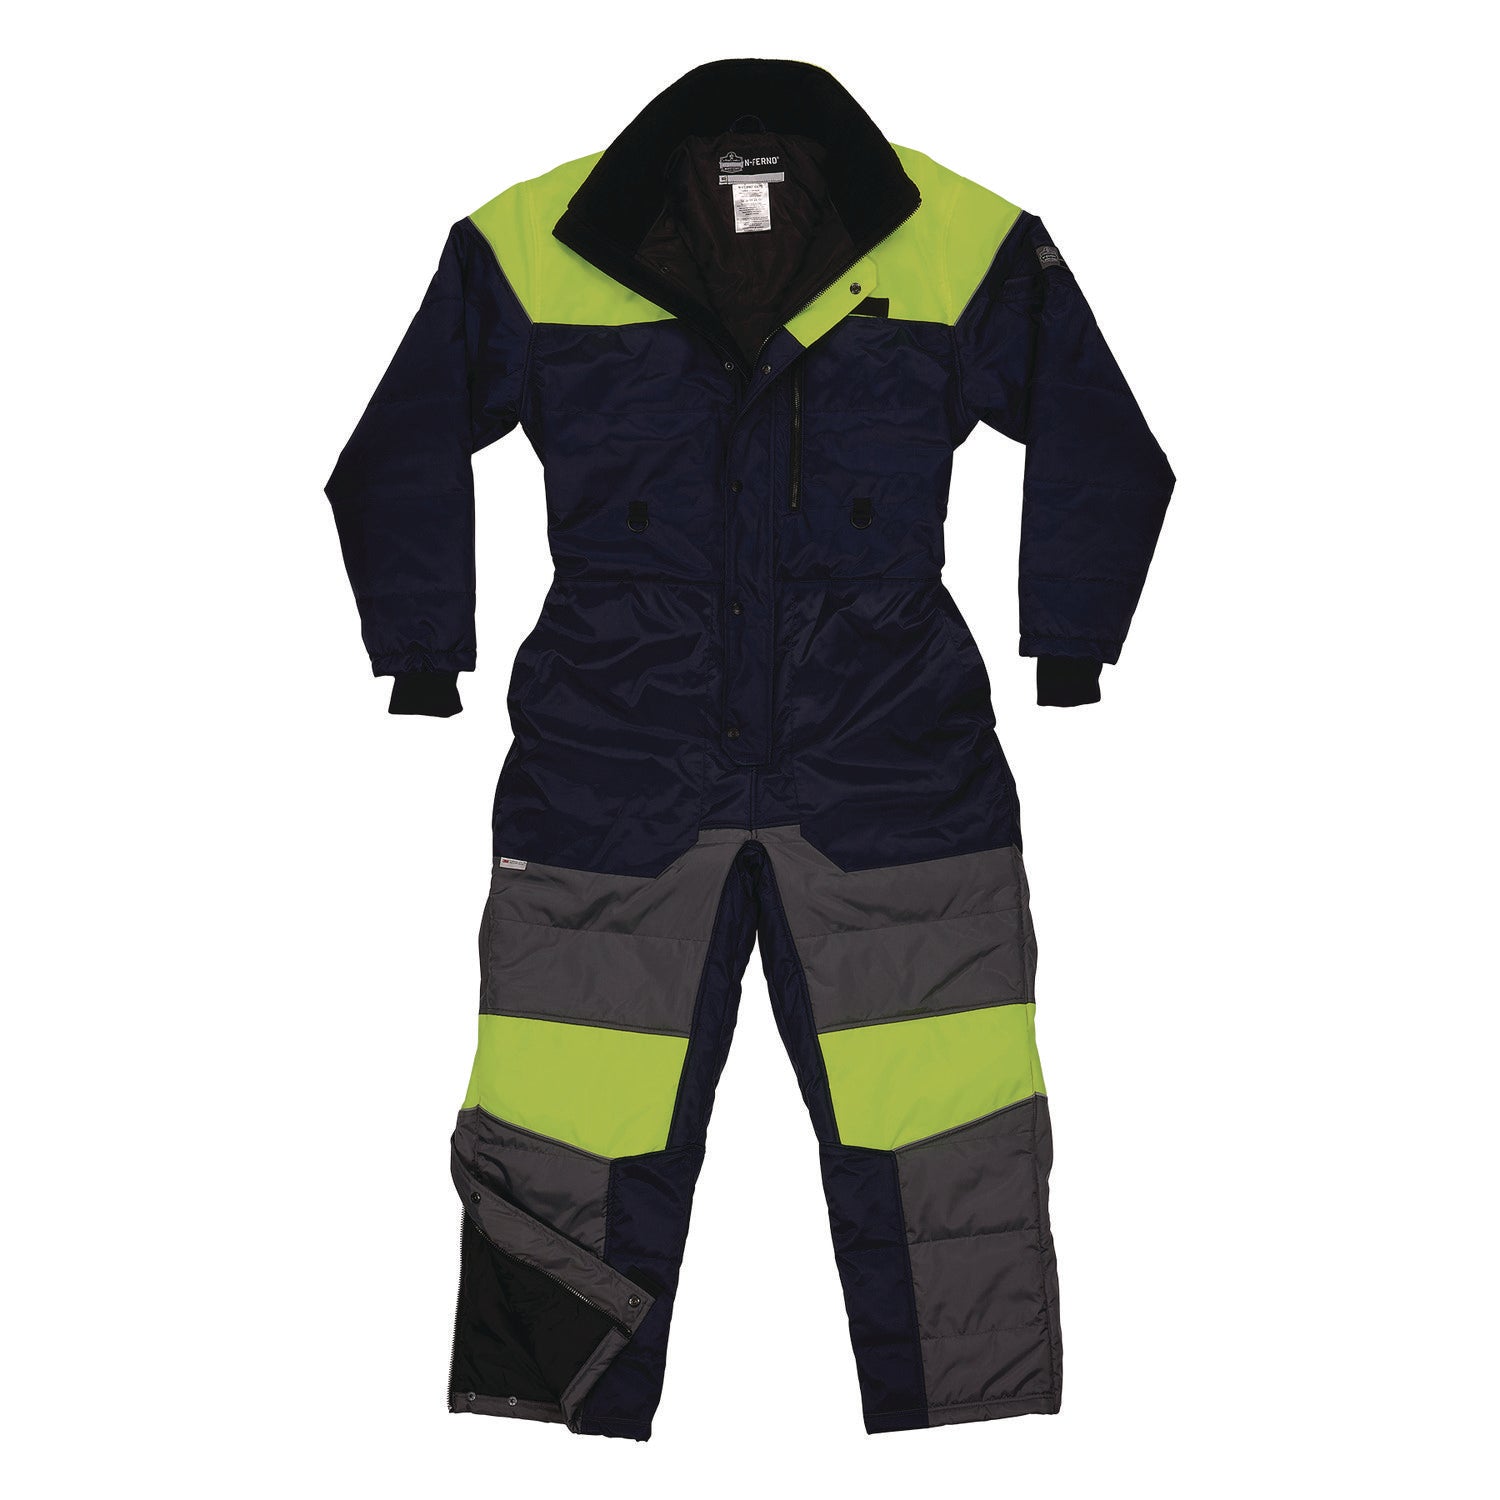 n-ferno-6475-insulated-freezer-coverall-x-large-navy-ships-in-1-3-business-days_ego41245 - 1